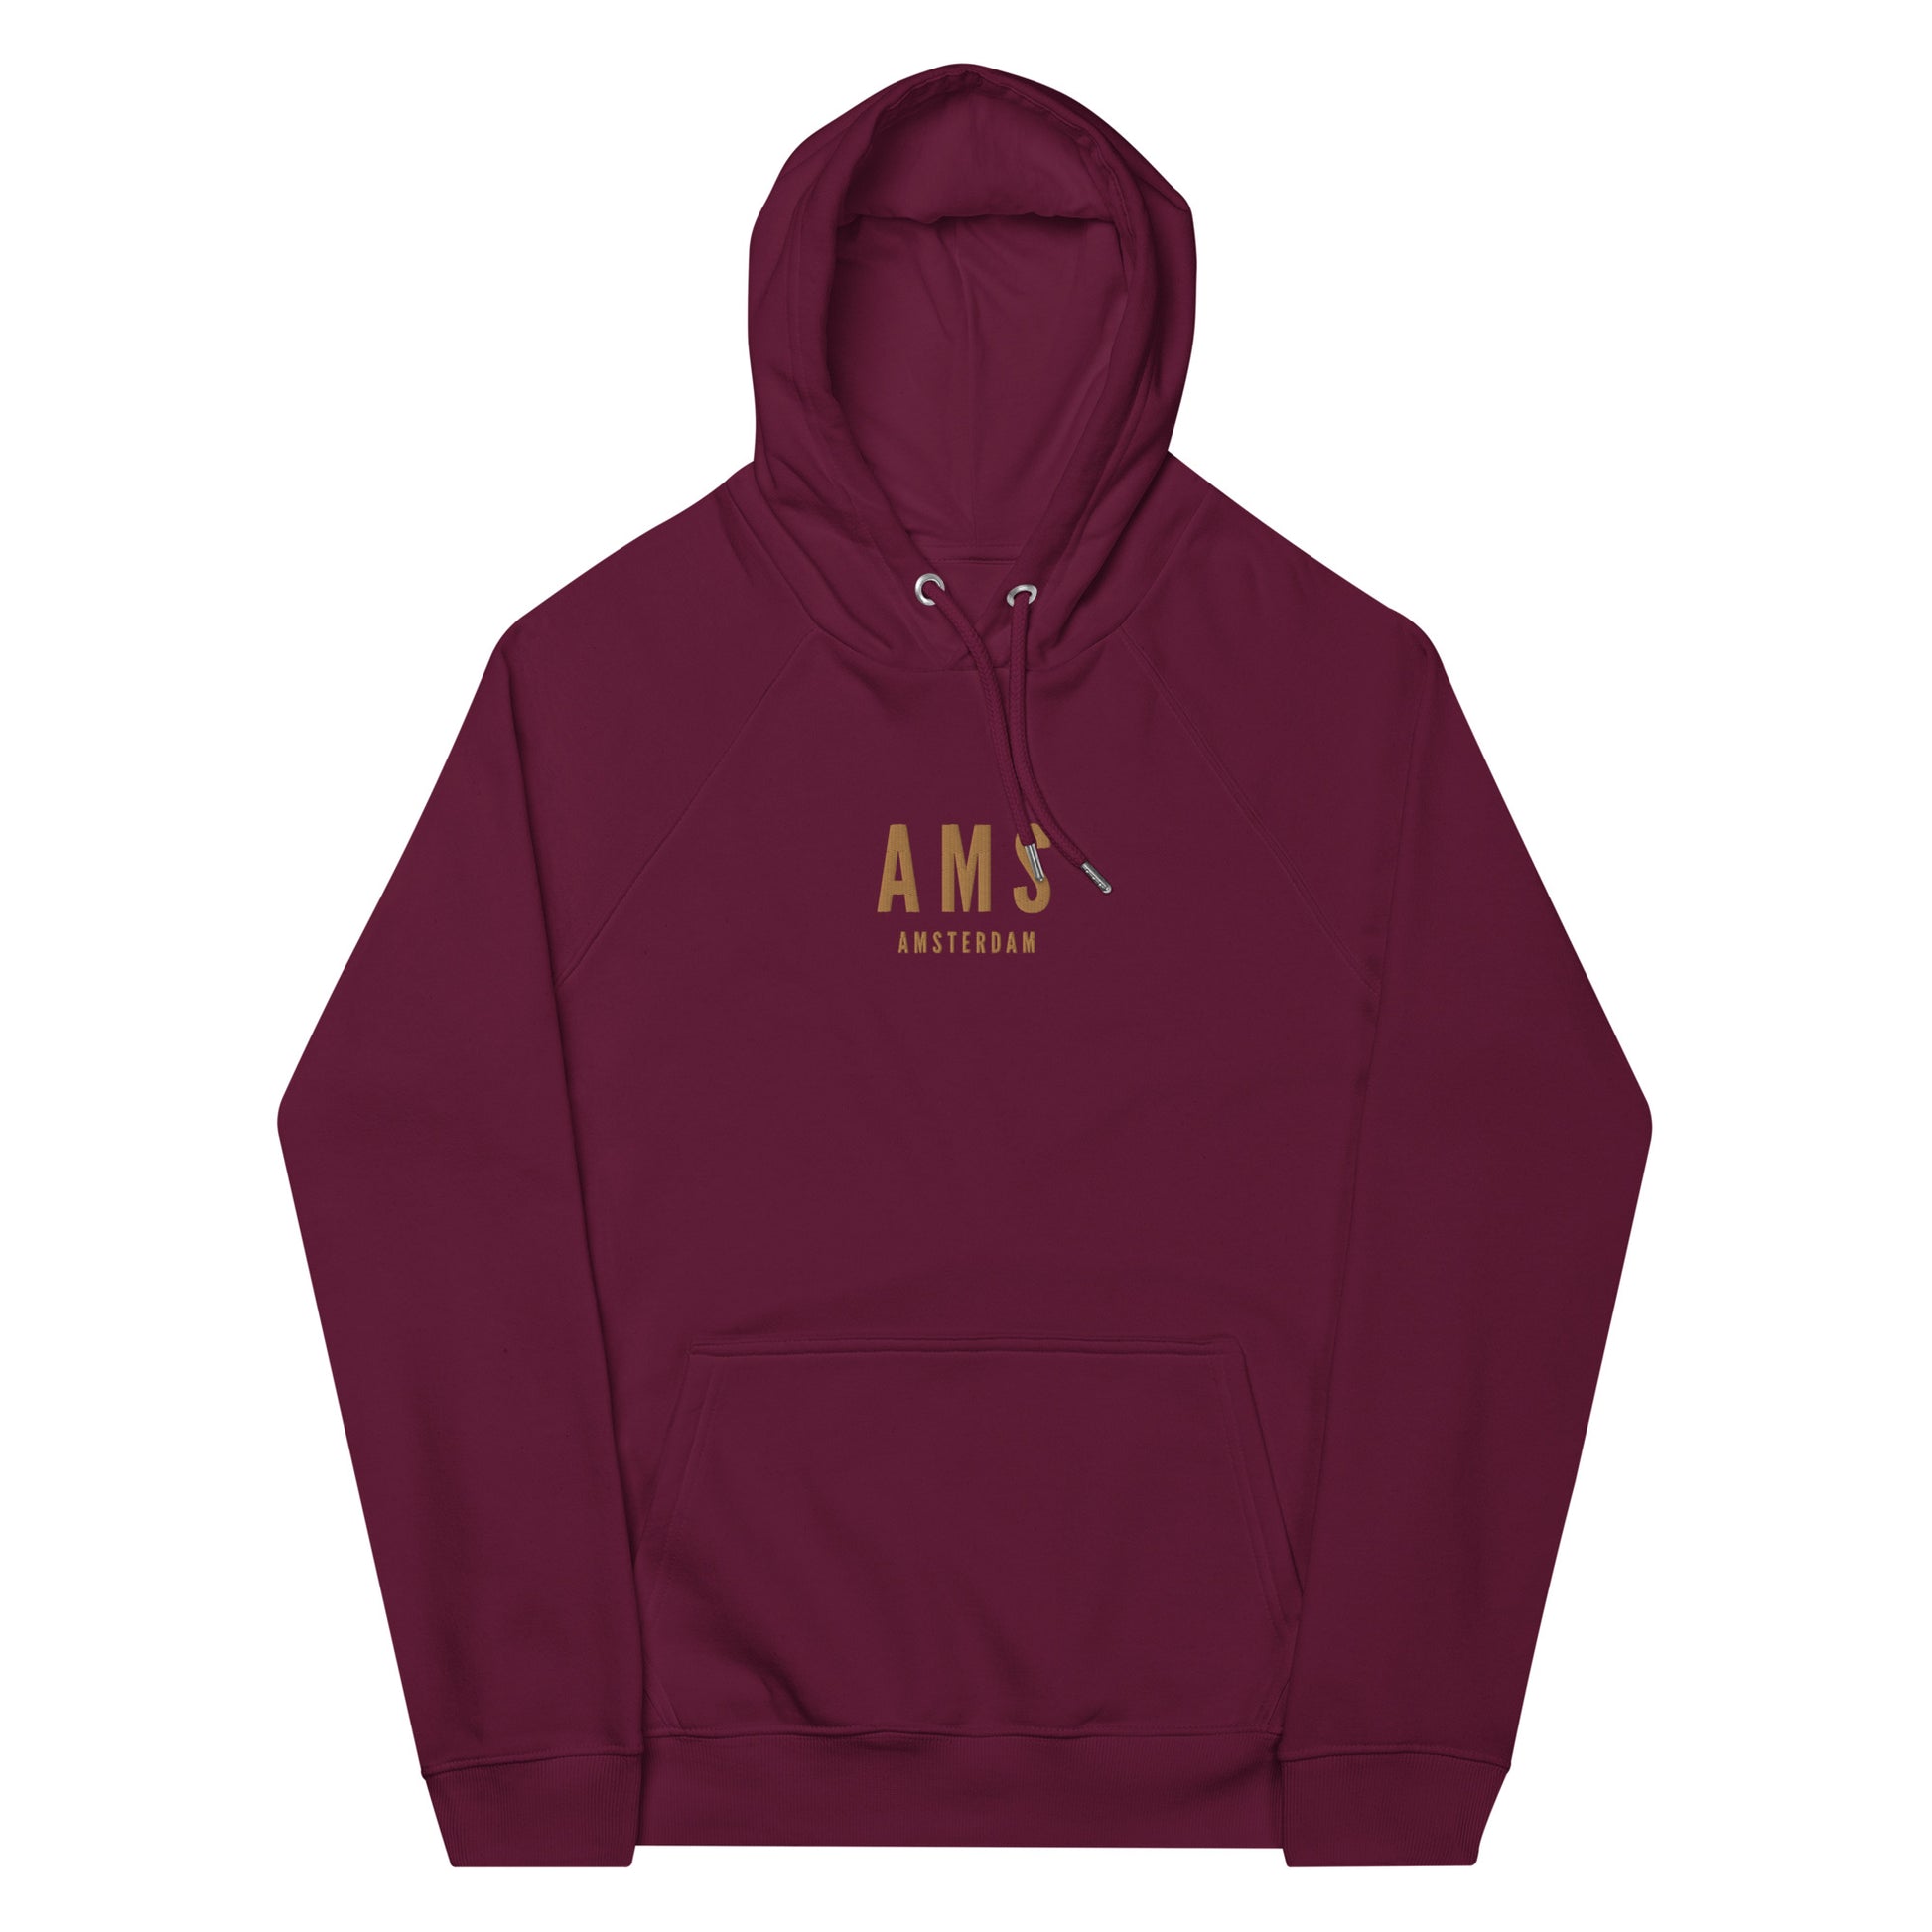 City Organic Hoodie - Old Gold • AMS Amsterdam • YHM Designs - Image 11